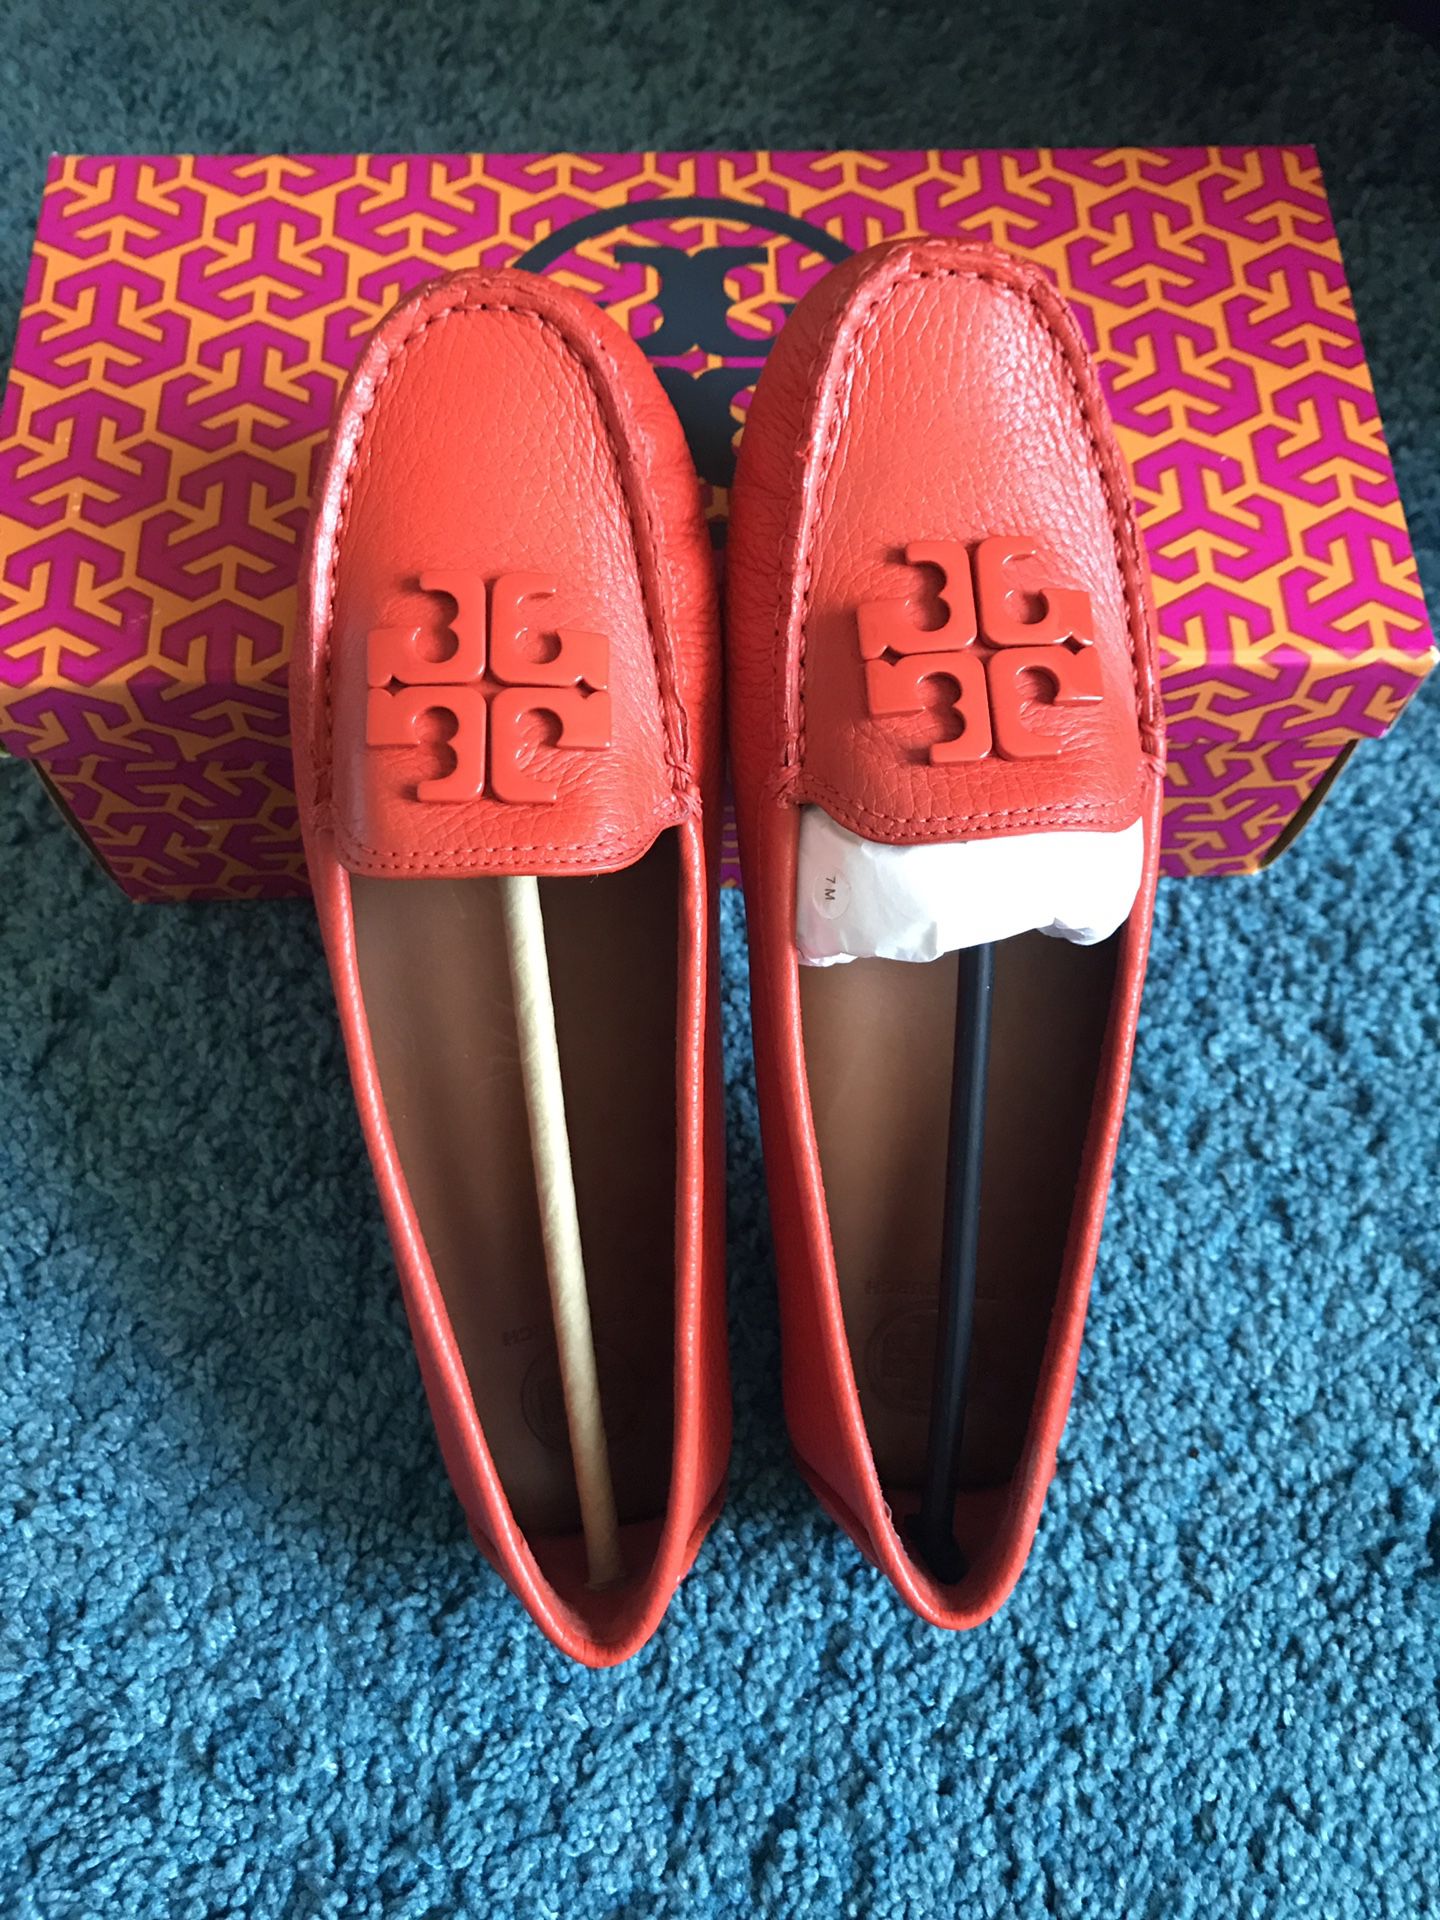 Authentic Tory Burch Lowell 2 driver in tumbled leather size 7 for Sale in  Los Angeles, CA - OfferUp